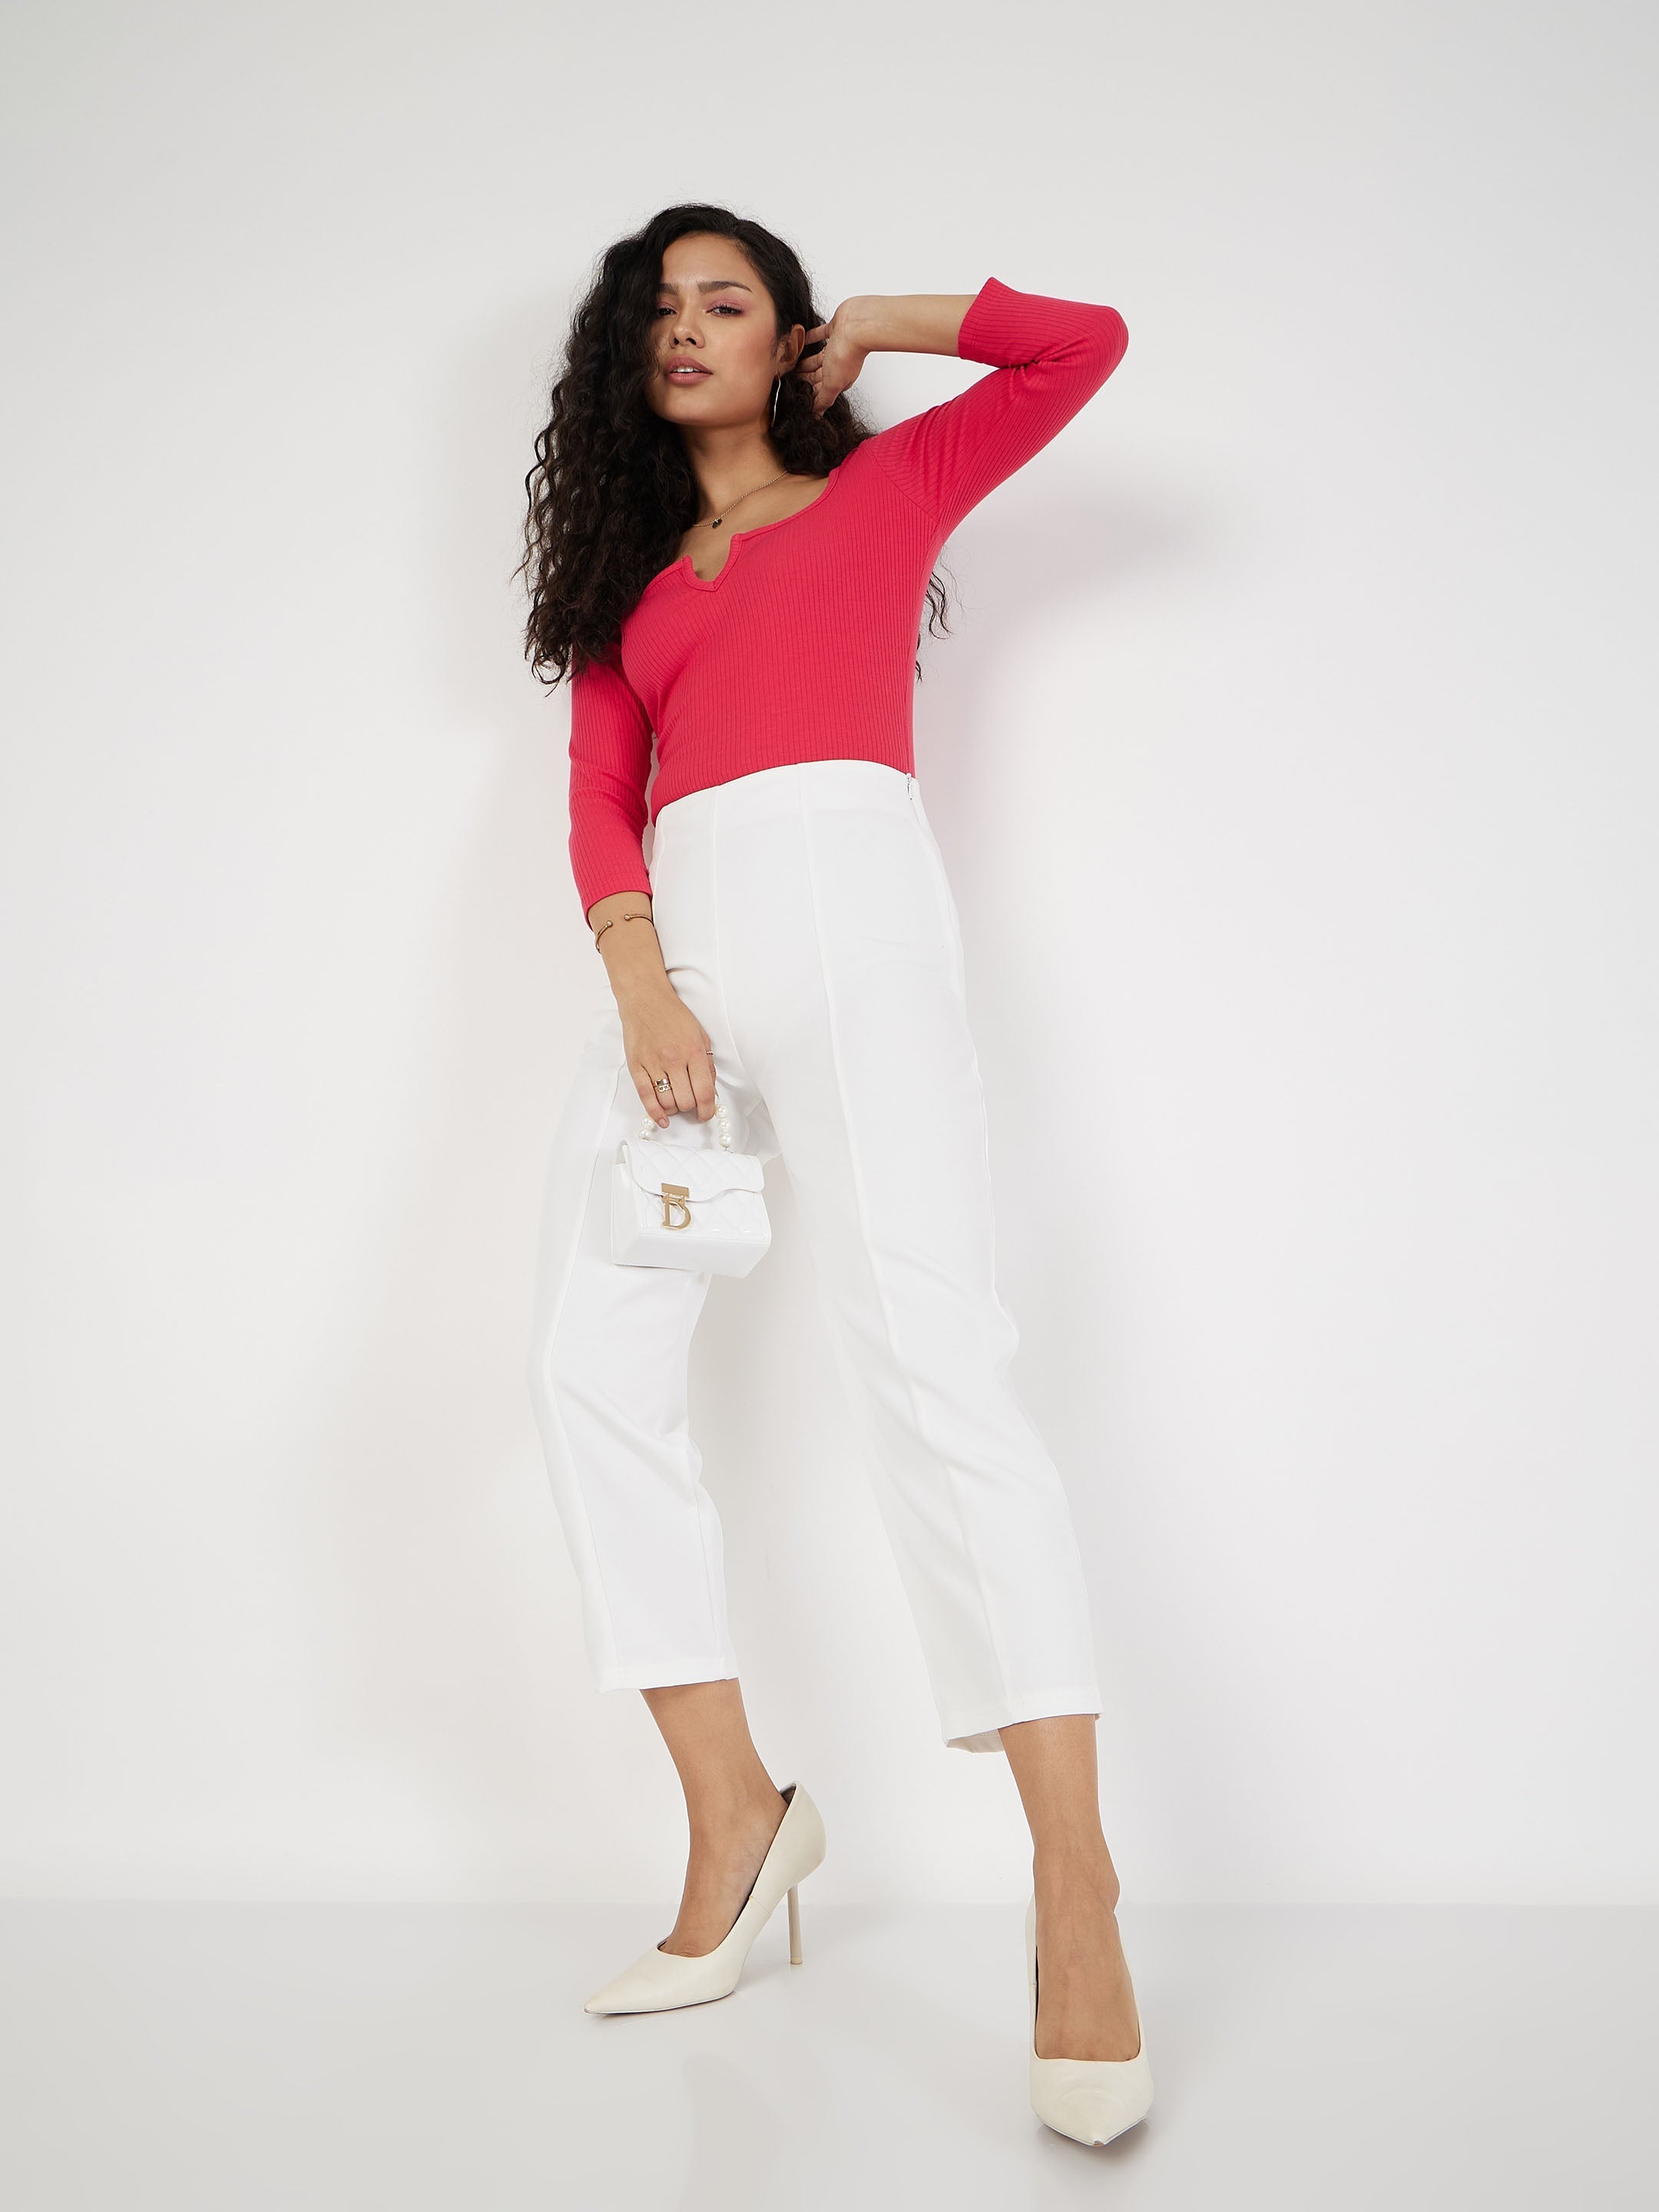 Women's White Front Darted Balloon Fit Pants - Lyush